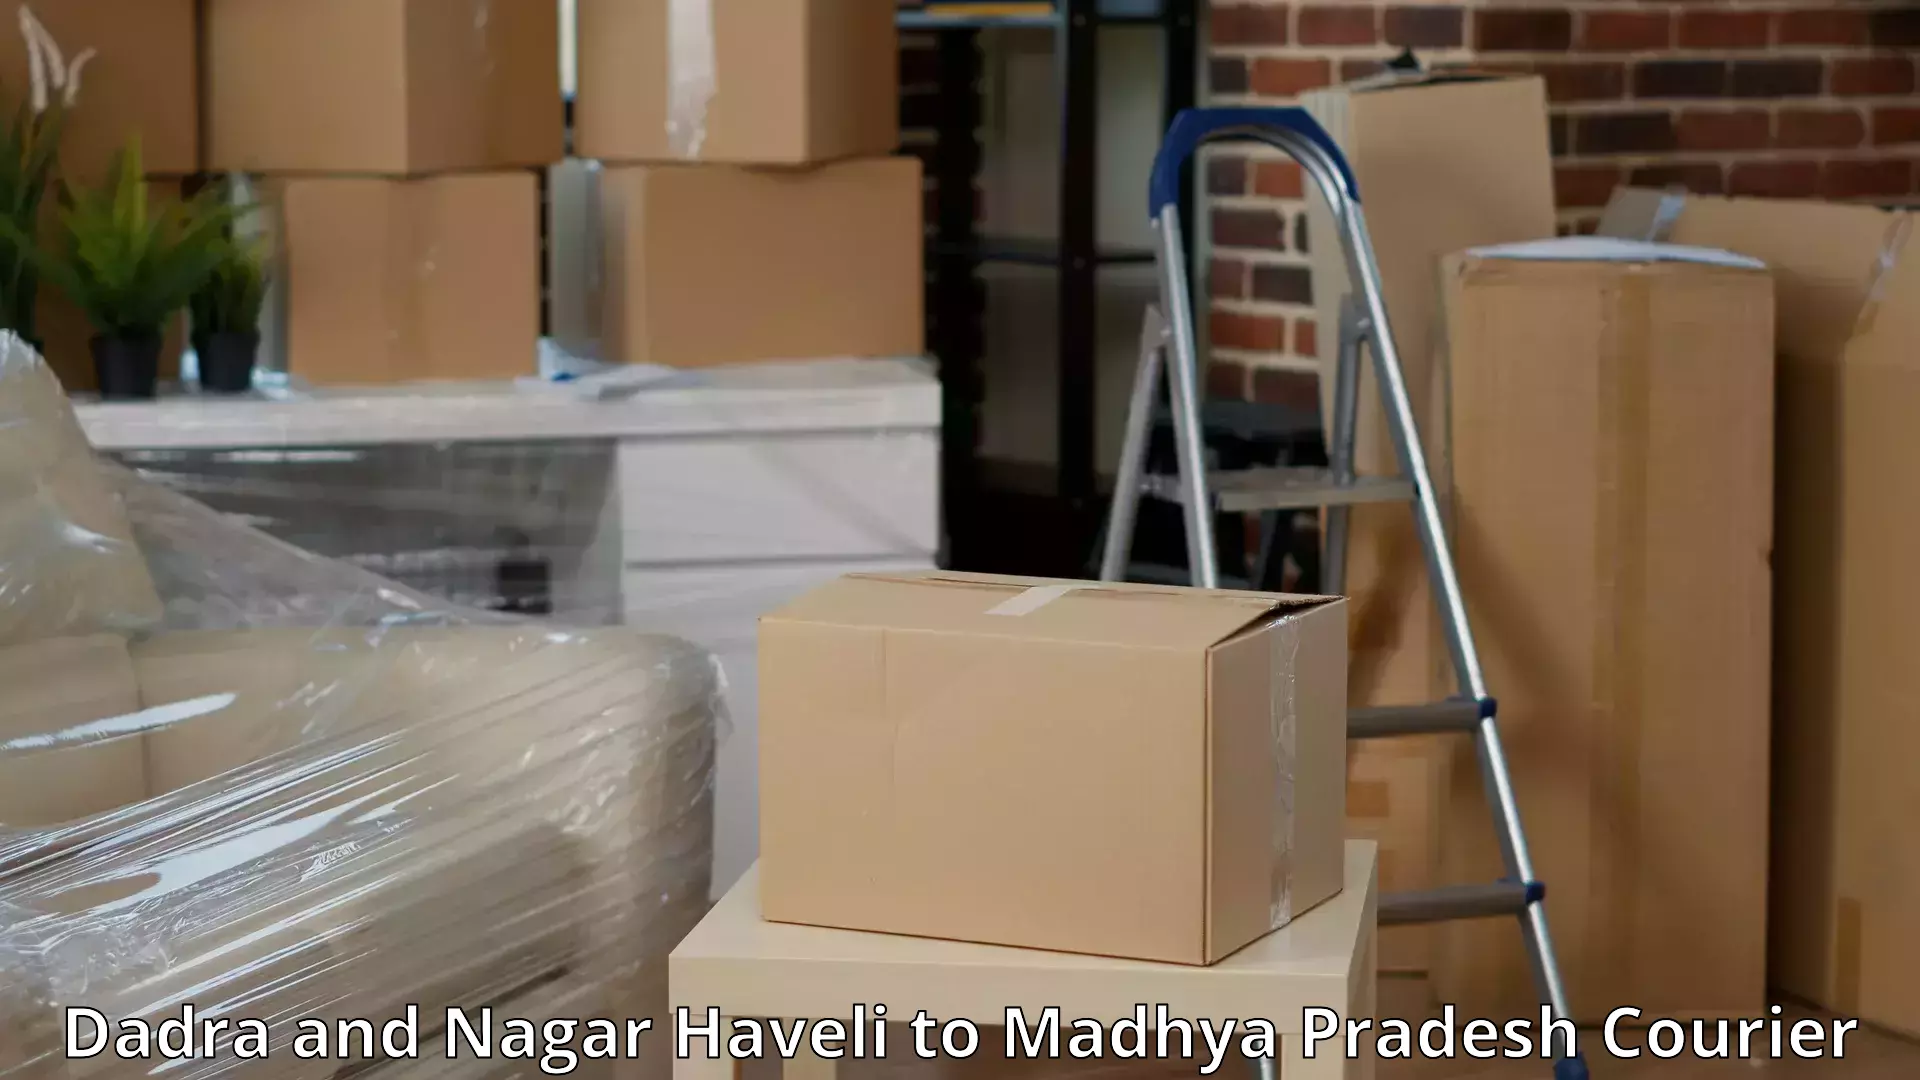 Furniture delivery service Dadra and Nagar Haveli to Ambah